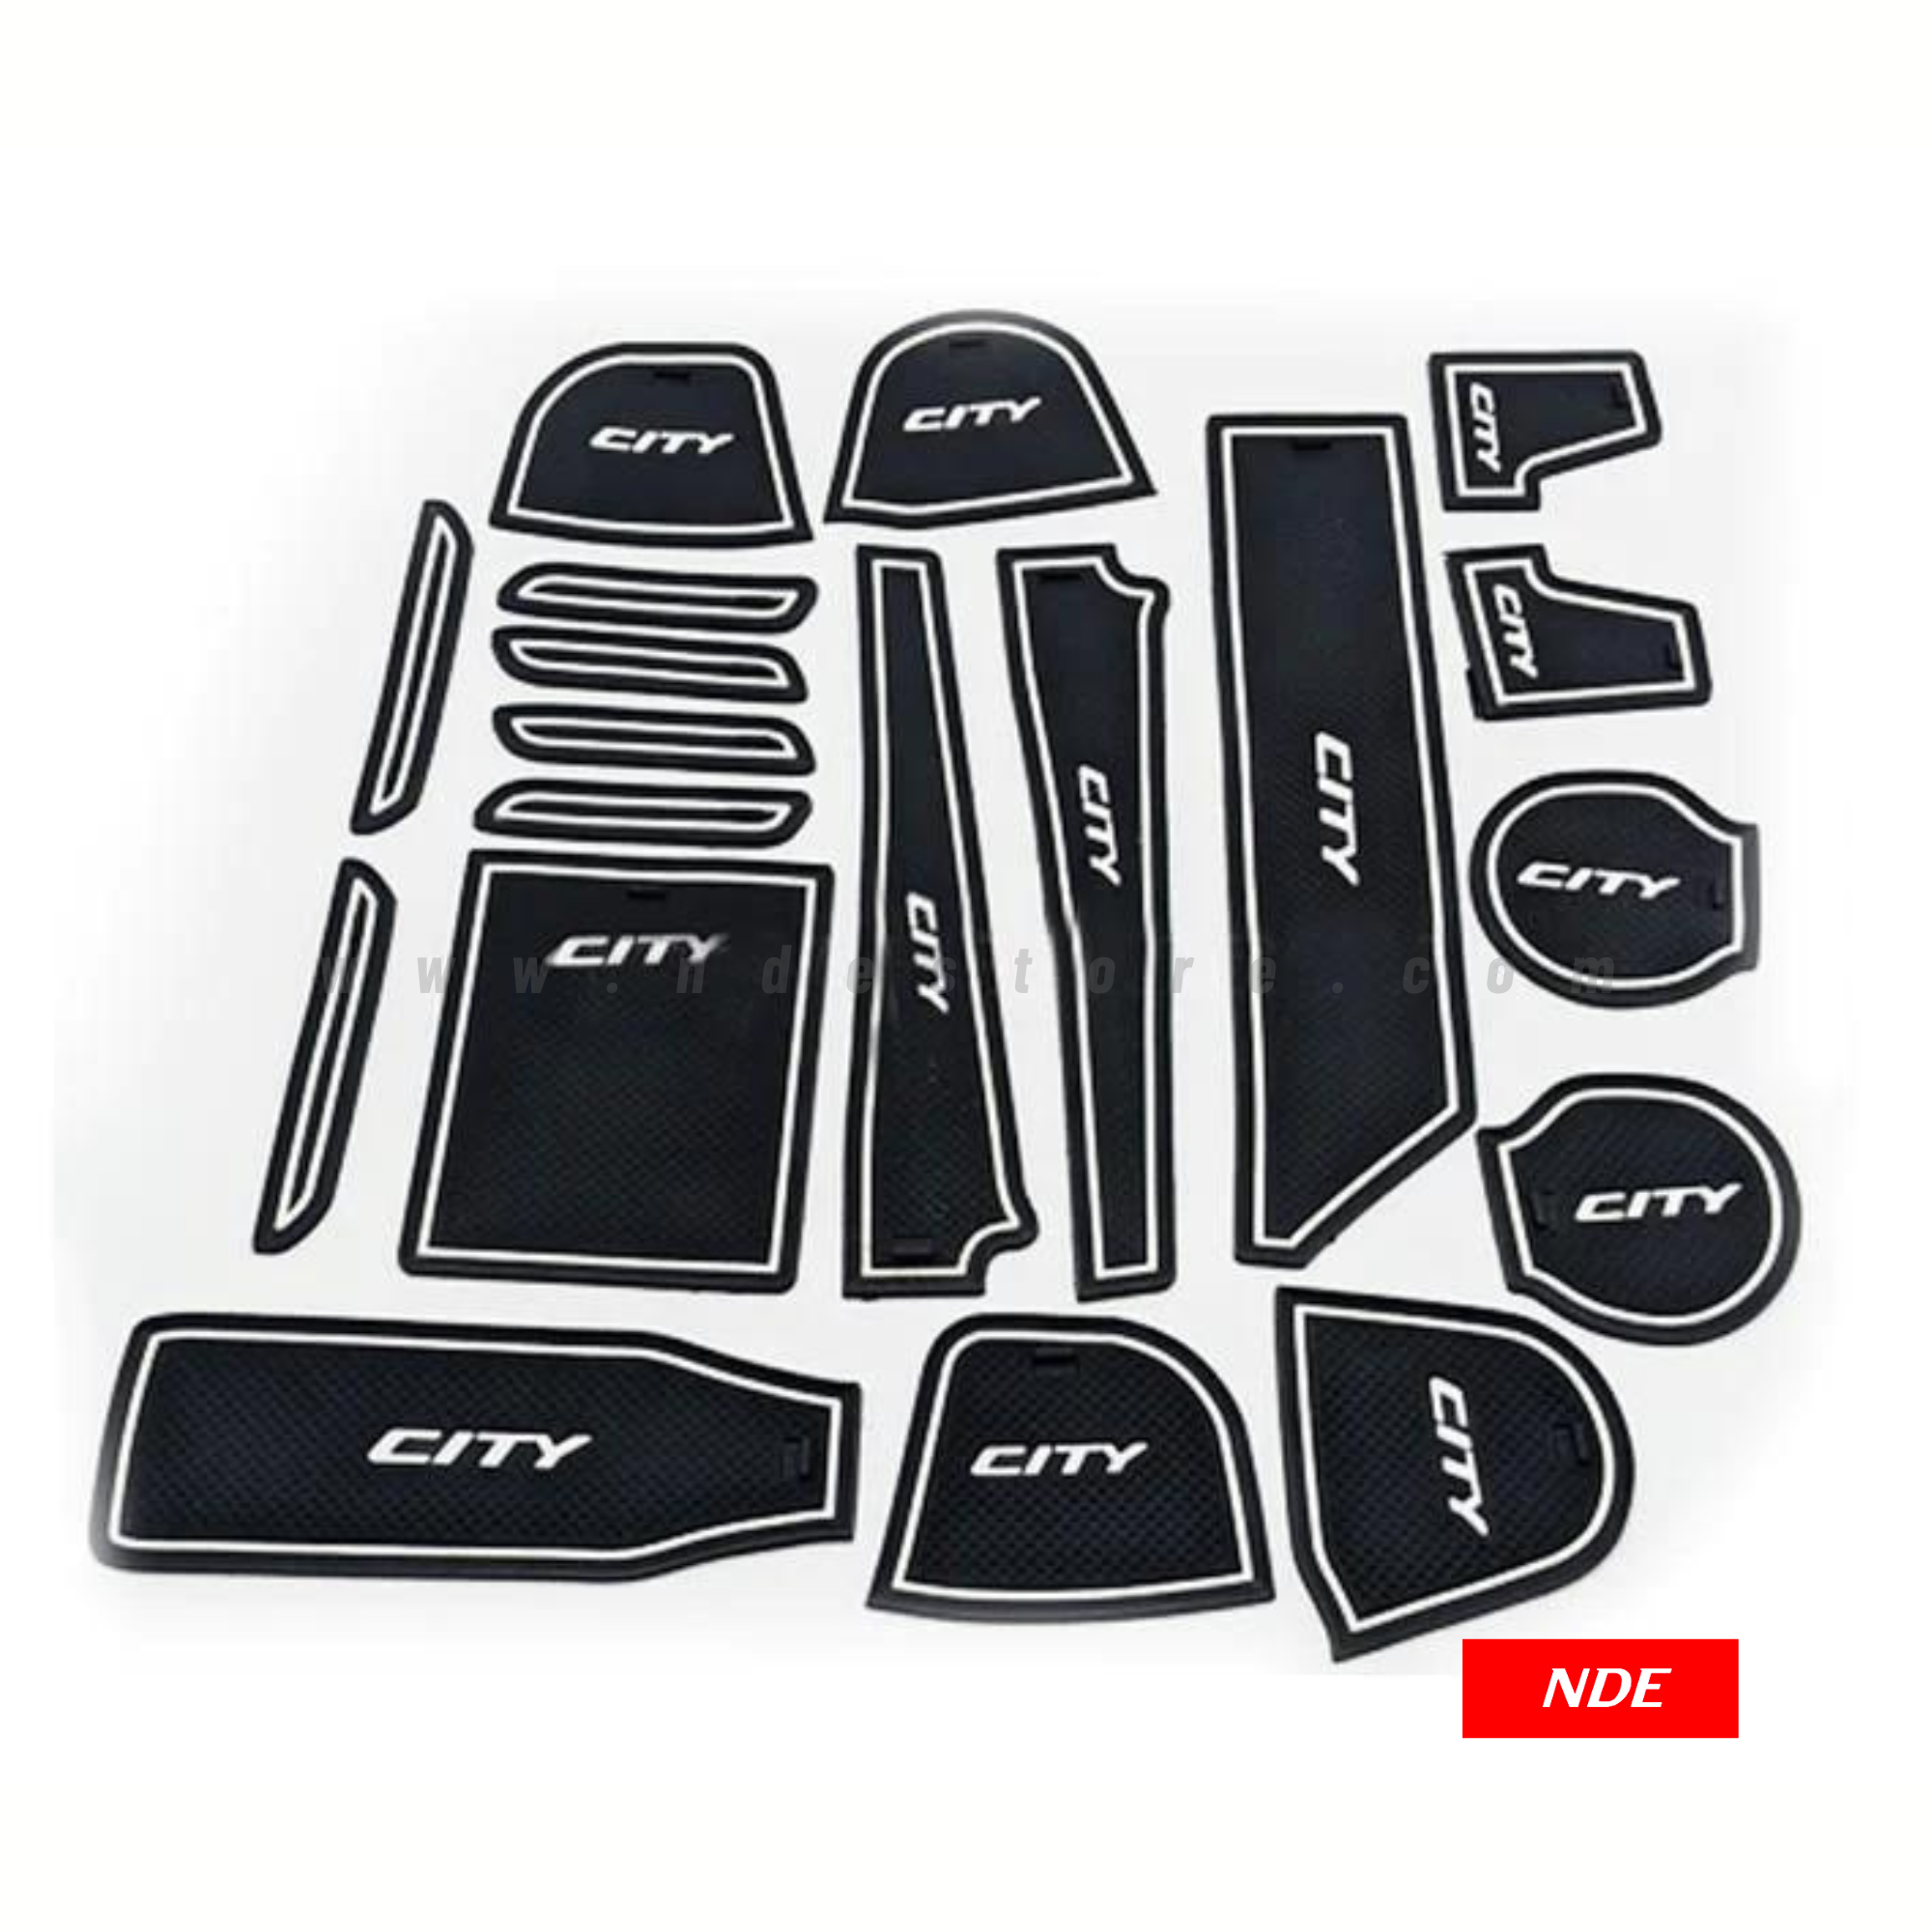 MATS FOR INTERIOR SURFACE PROTECTION FOR HONDA CITY (2021-2024)